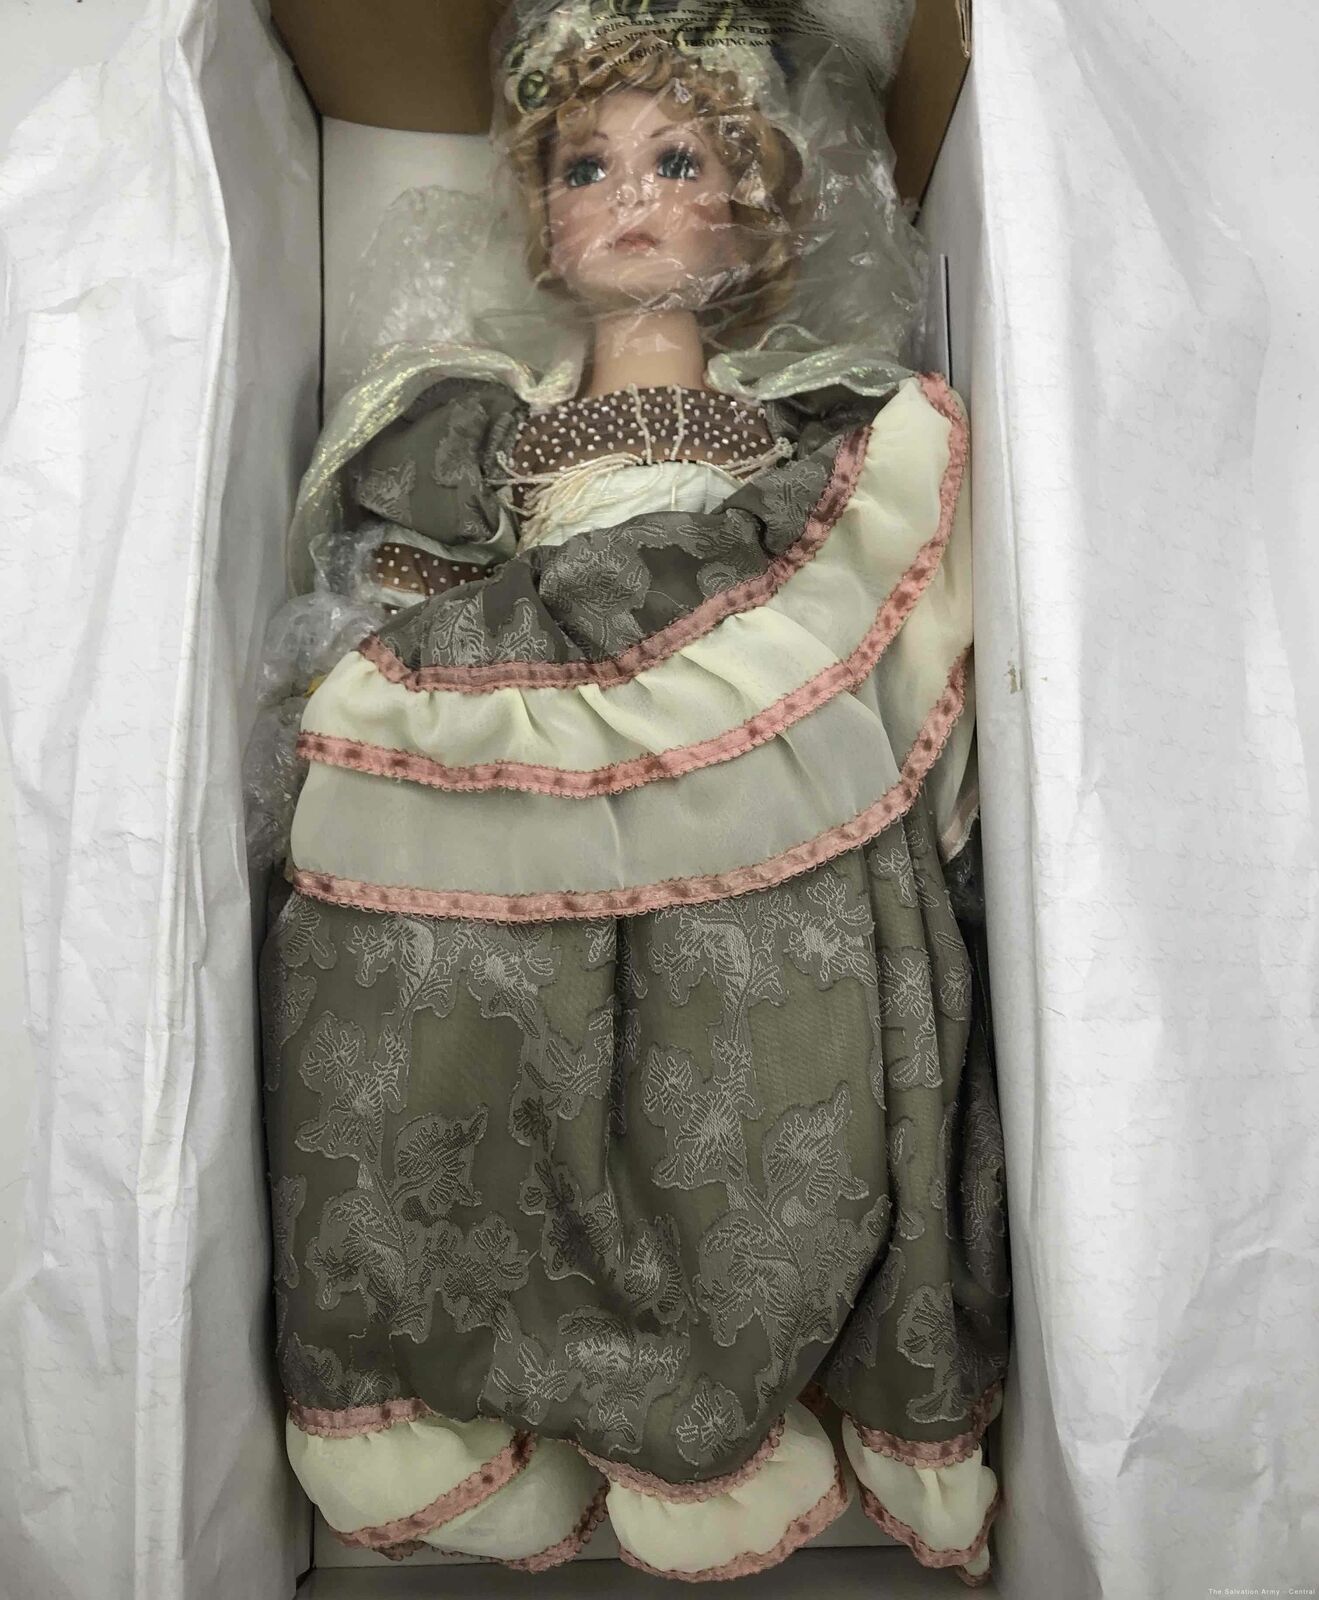 William Tung Collection 22in Porcelain Doll - "catherine"